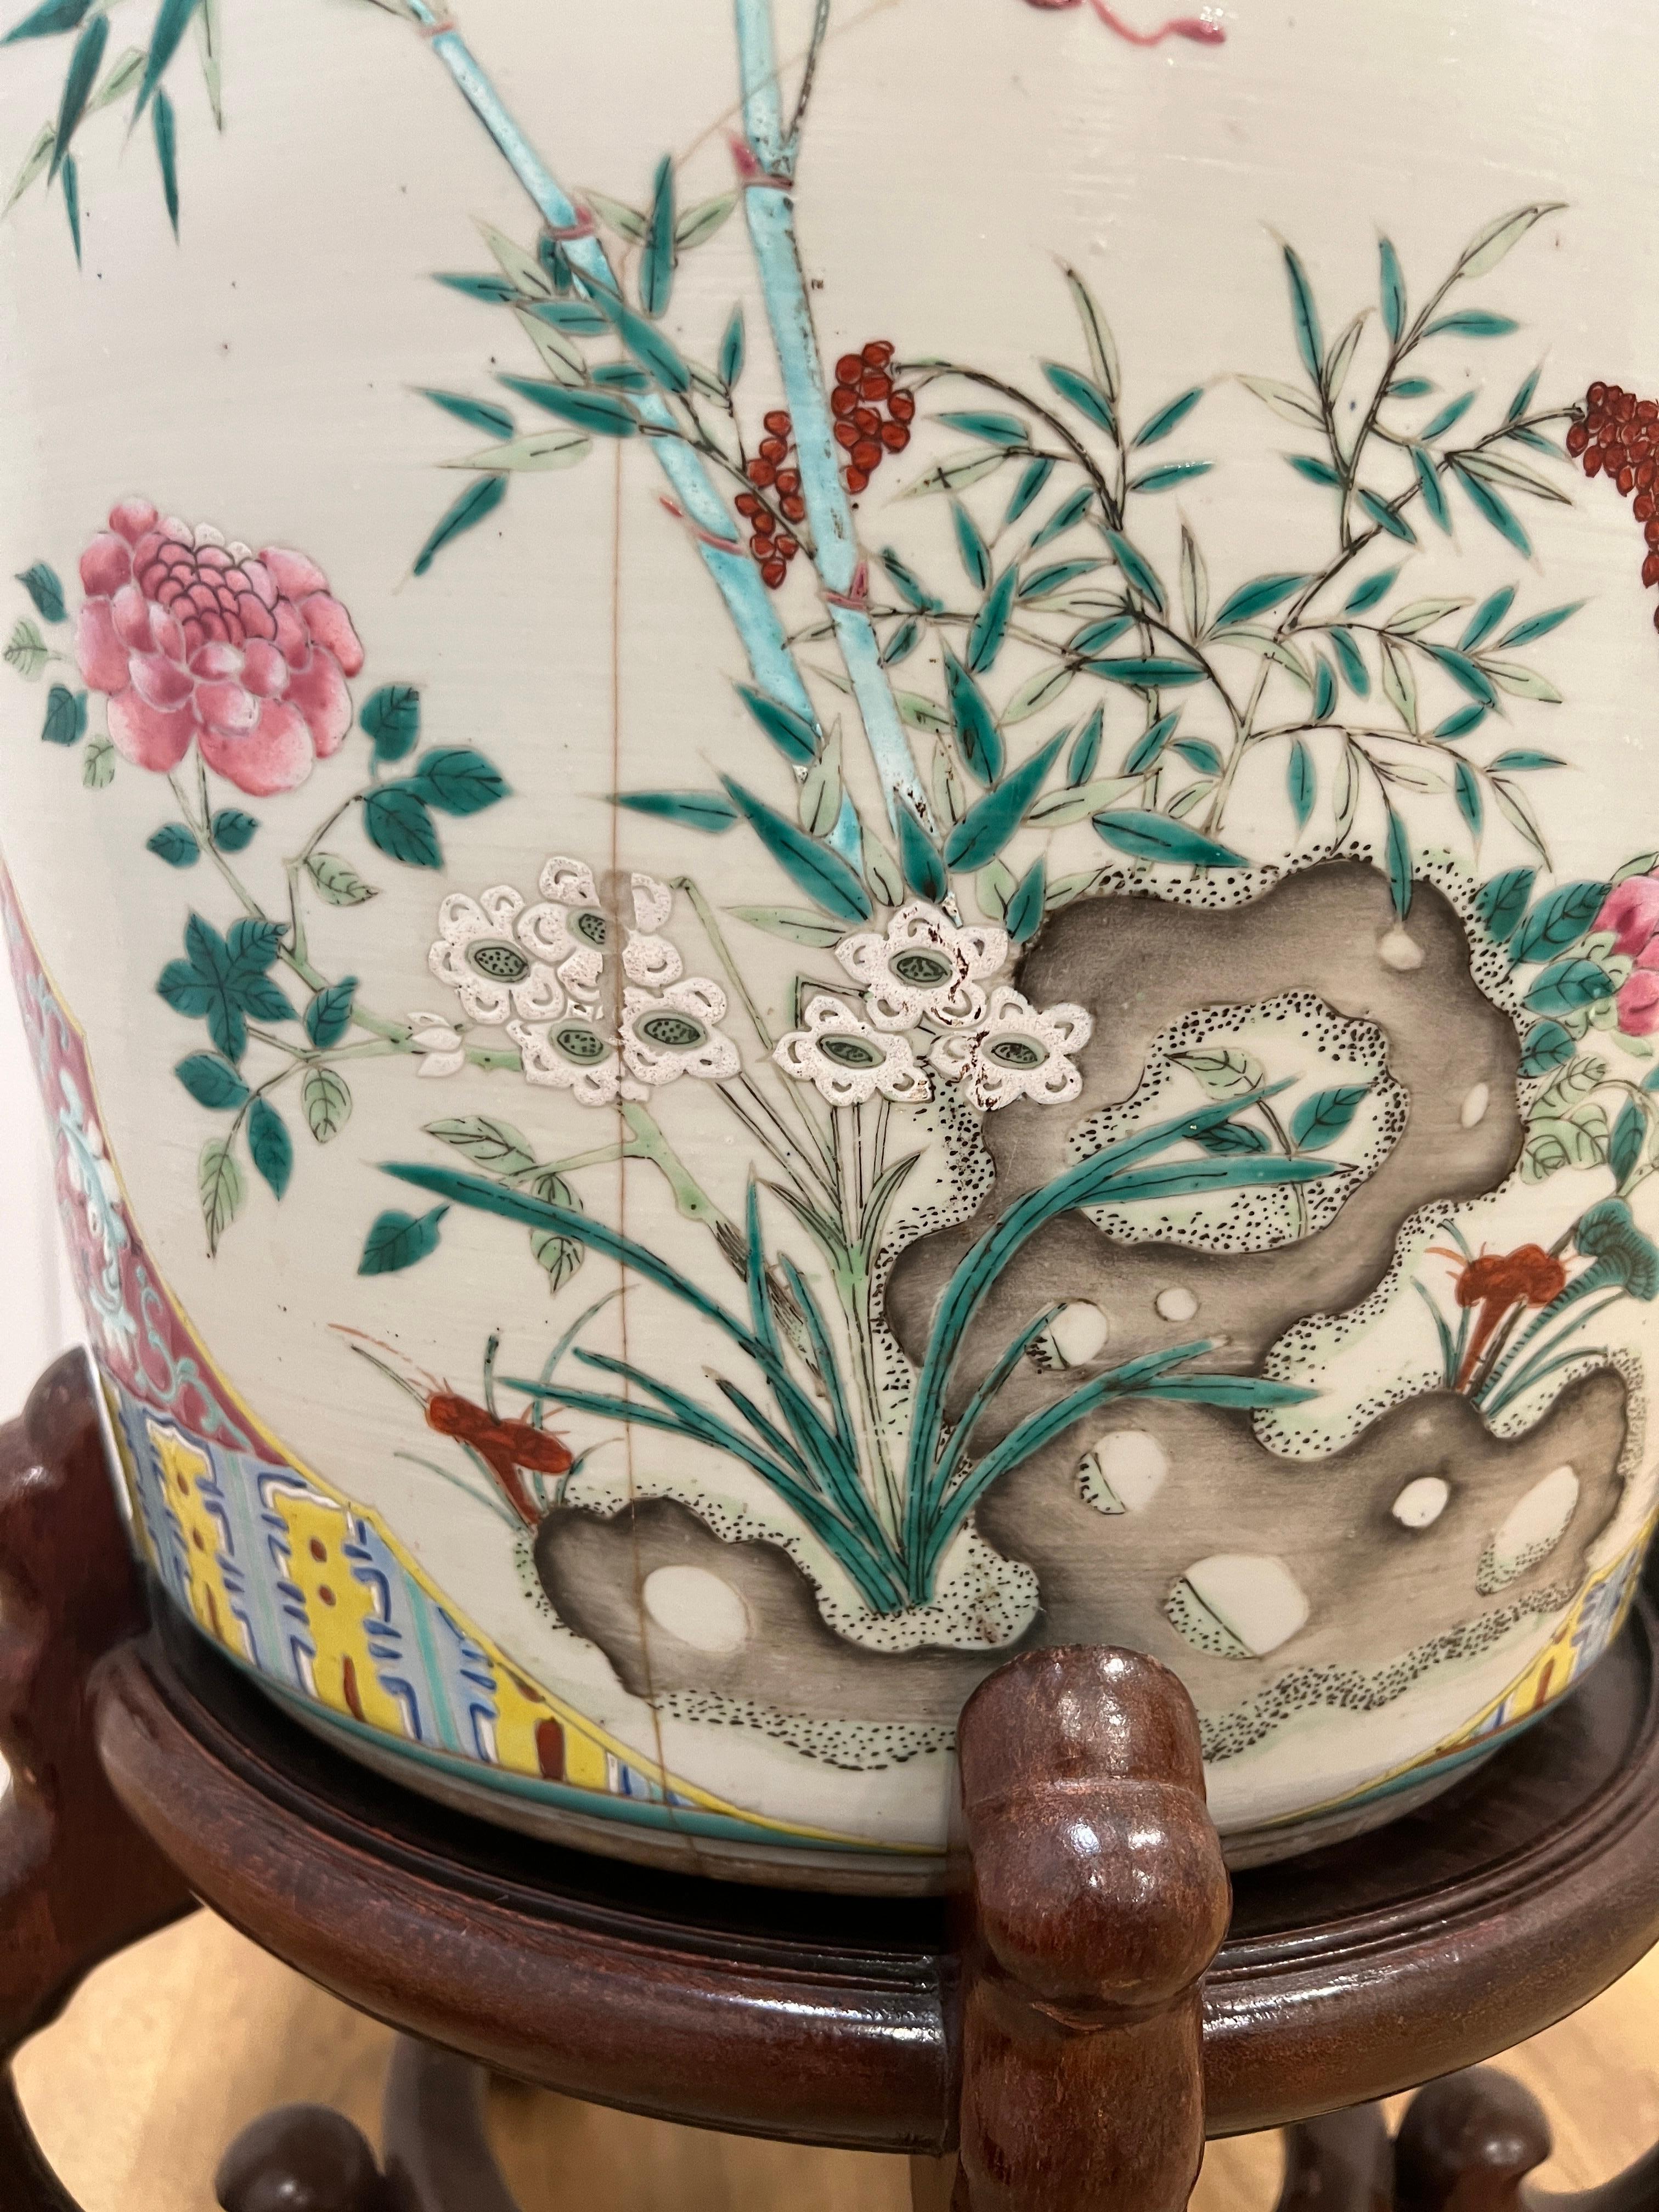 19th Century, Chinese Export Famille Rose Porcelain Planter or Fish Bowl For Sale 3